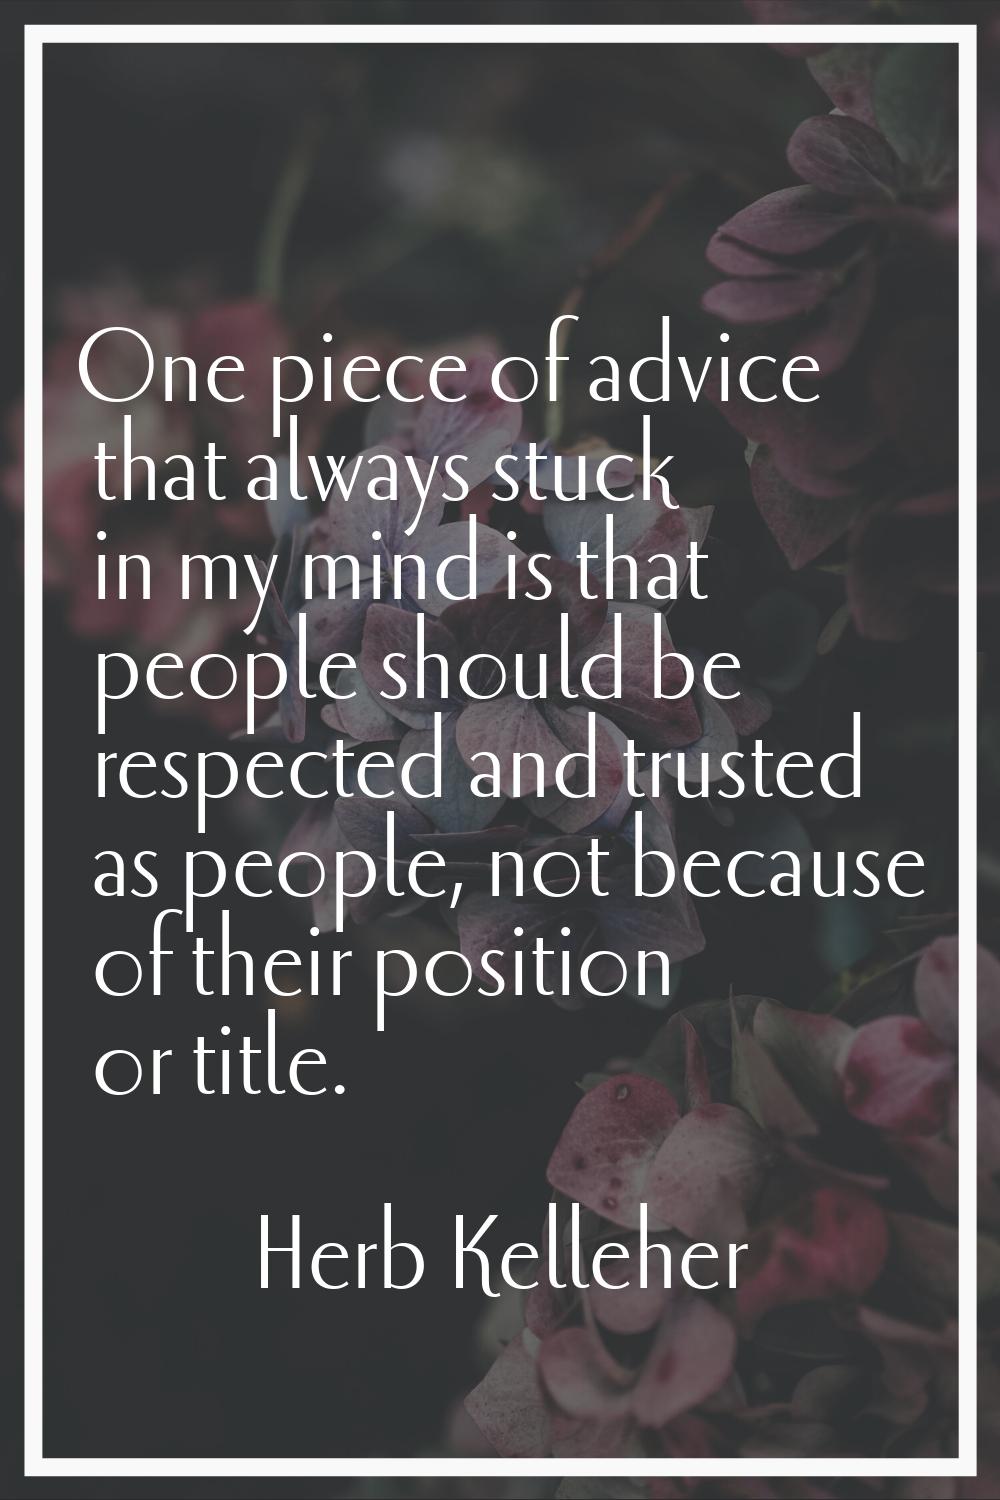 One piece of advice that always stuck in my mind is that people should be respected and trusted as 